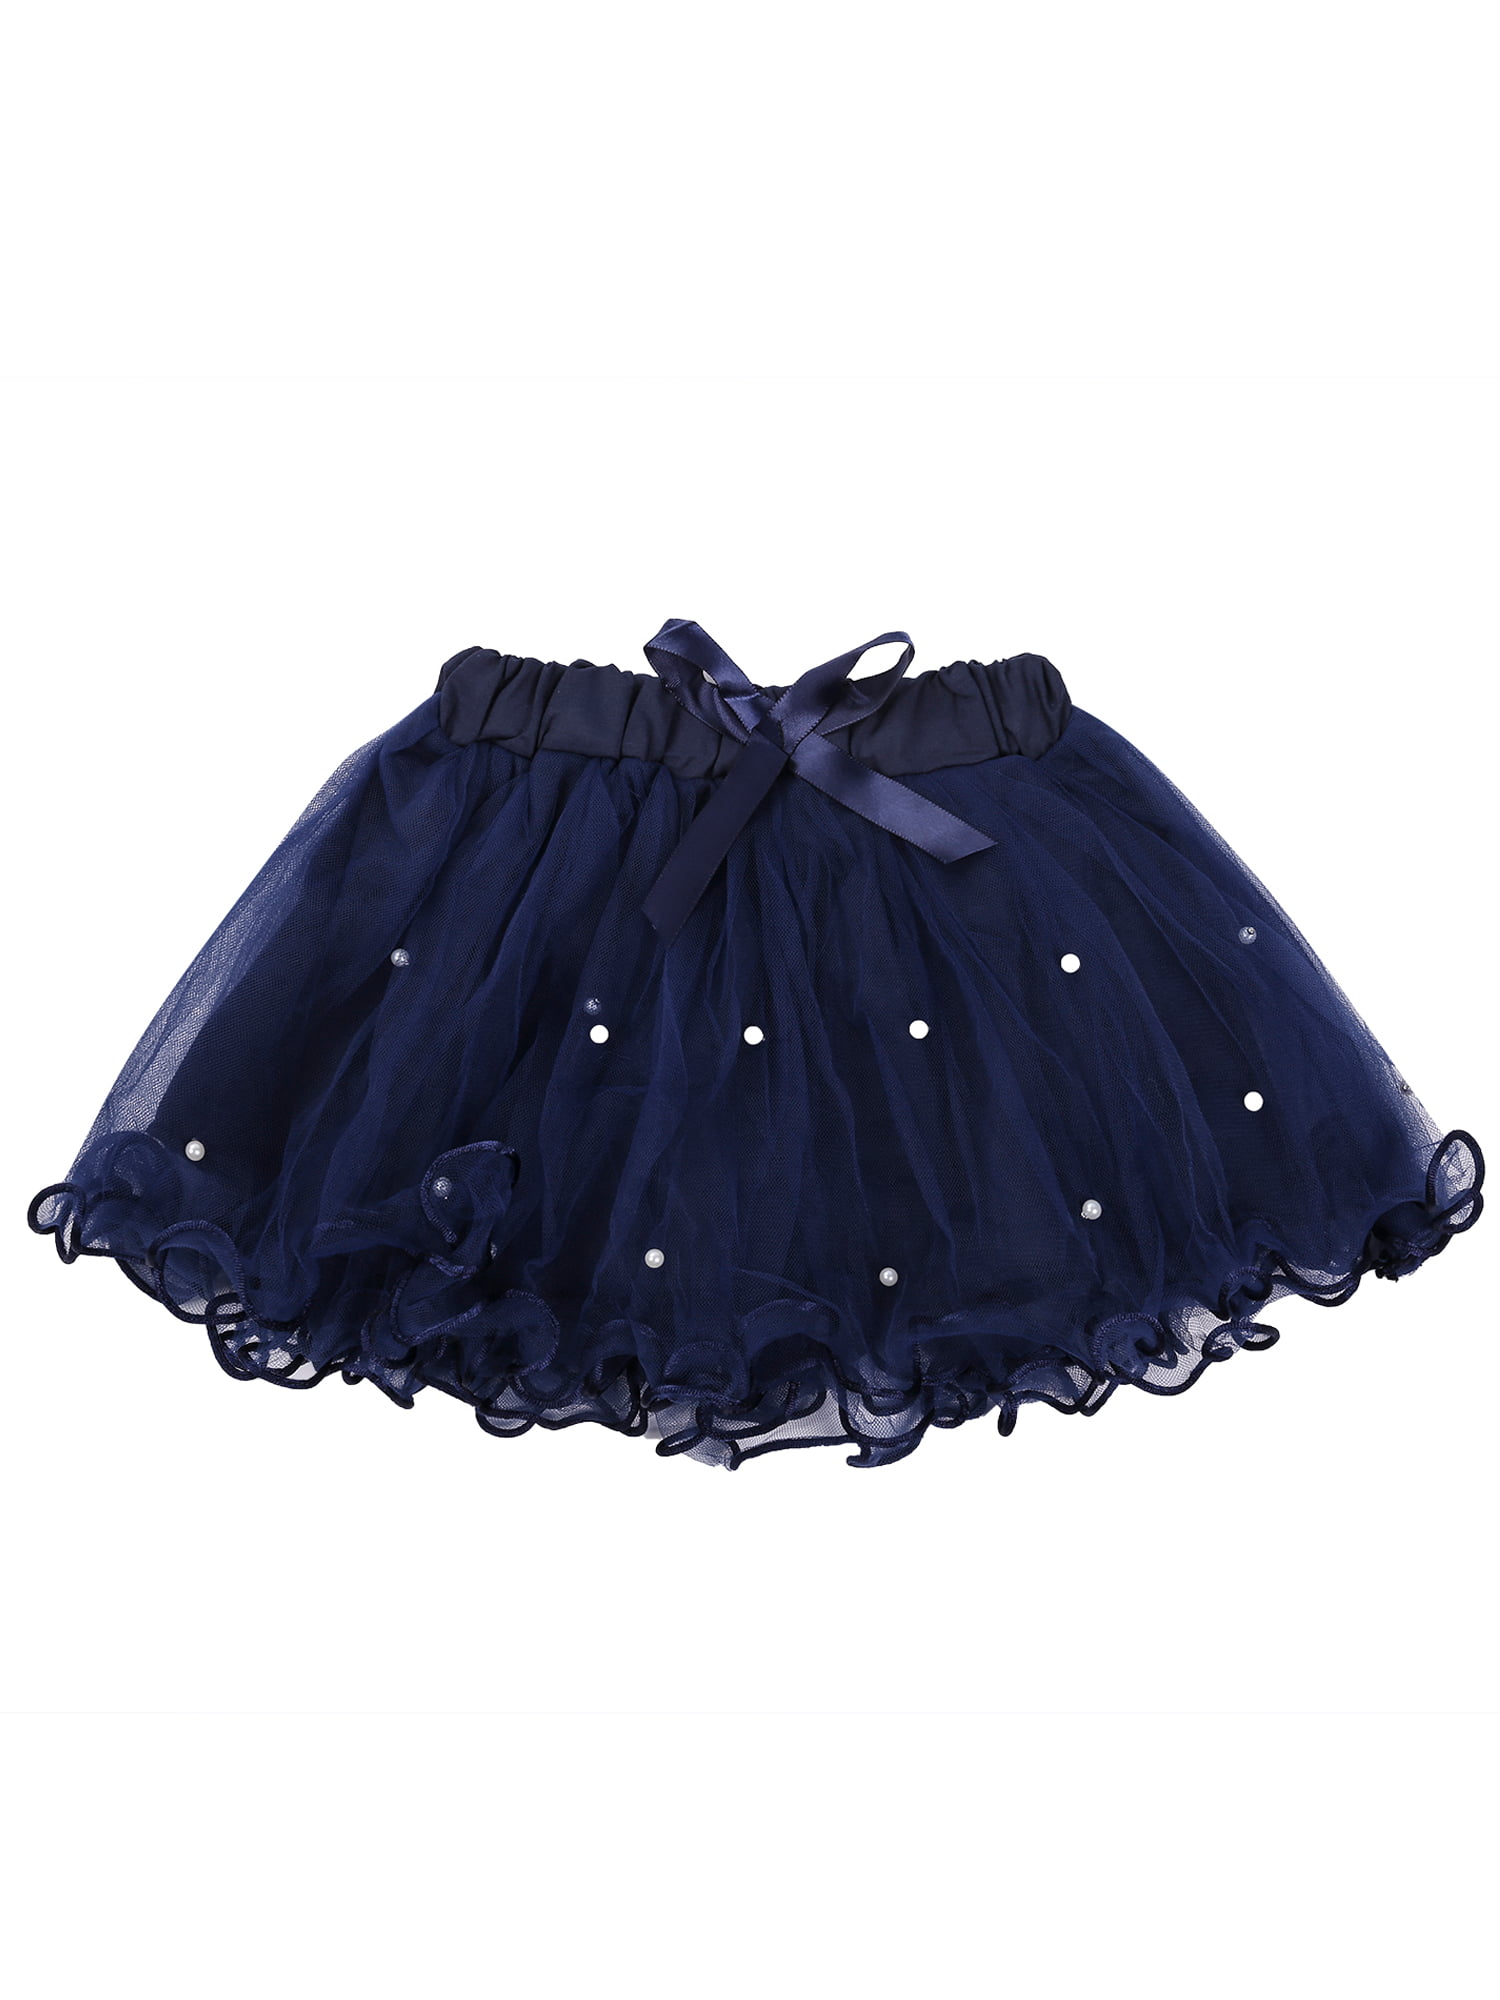 Kid's 4 Layers 3D Mini Bubble Skirt With Little Colorful Puff Balls Tutu Skirts 